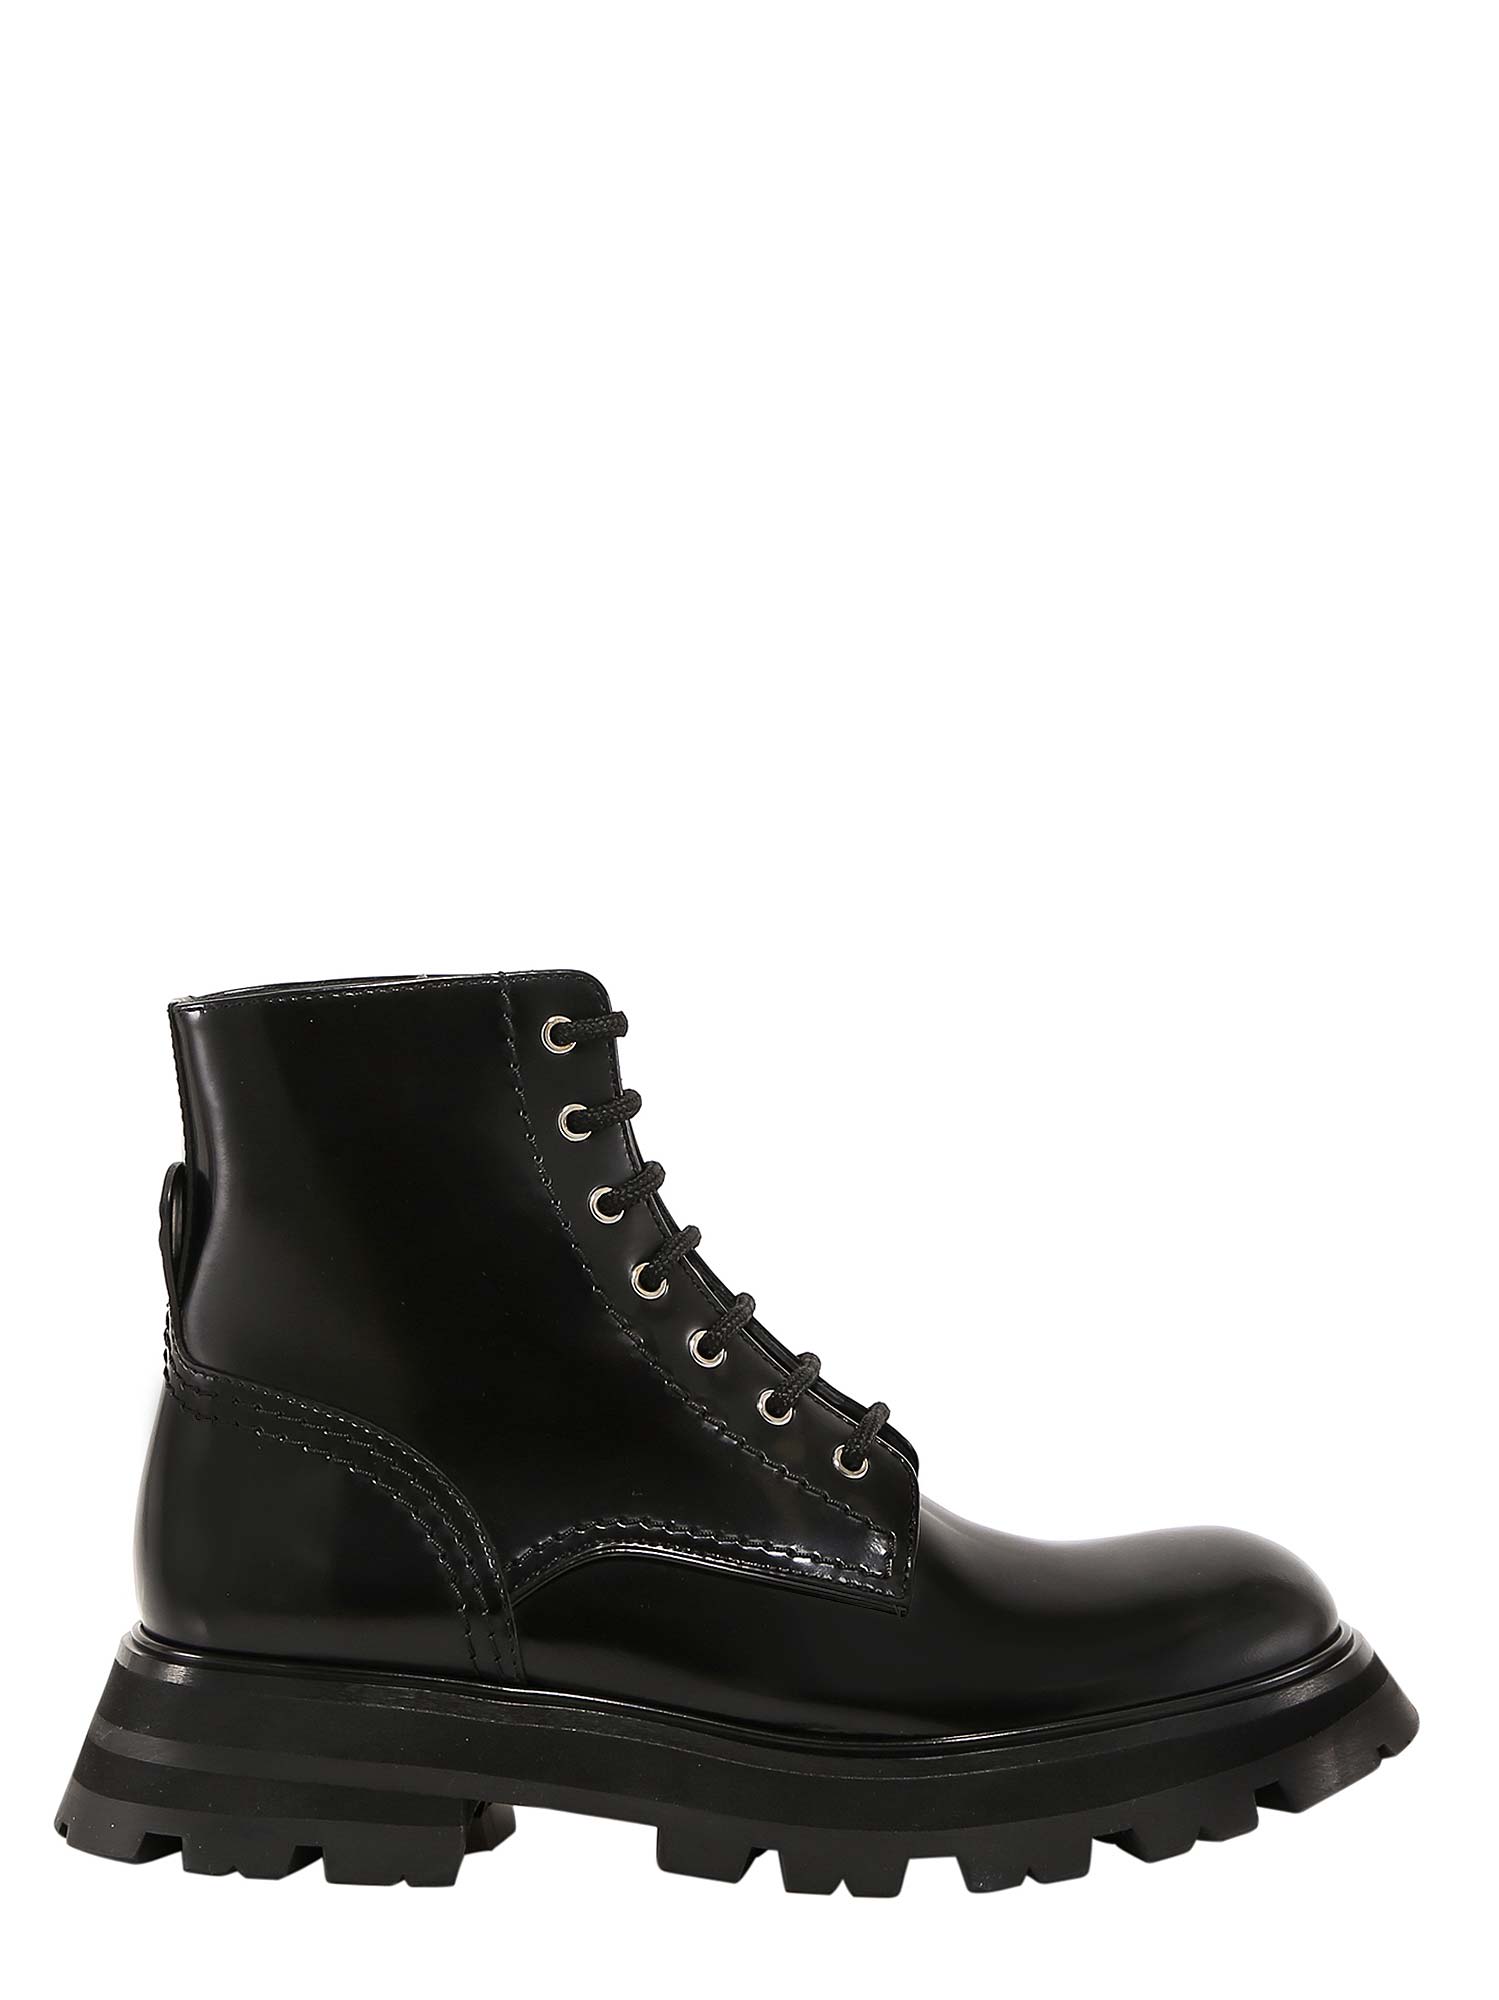 Buy Alexander McQueen Wander Ankle Boots online, shop Alexander McQueen shoes with free shipping